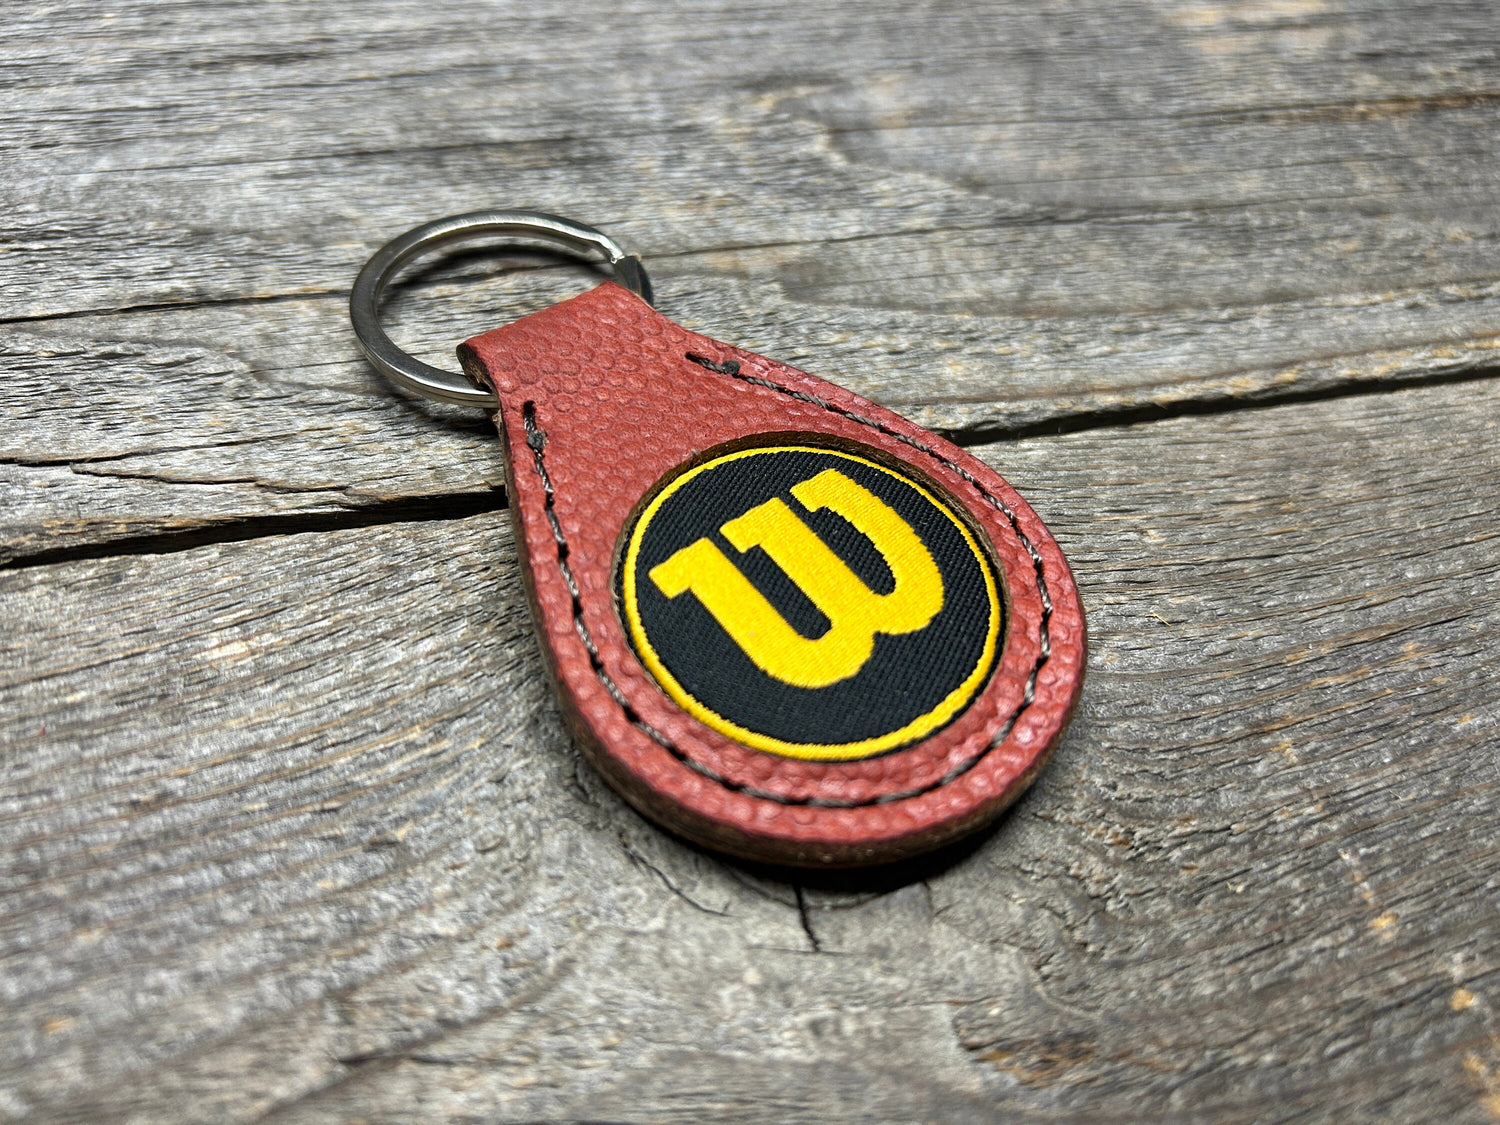 New Item! Wilson/Horween NFL Football Leather Key Chain!